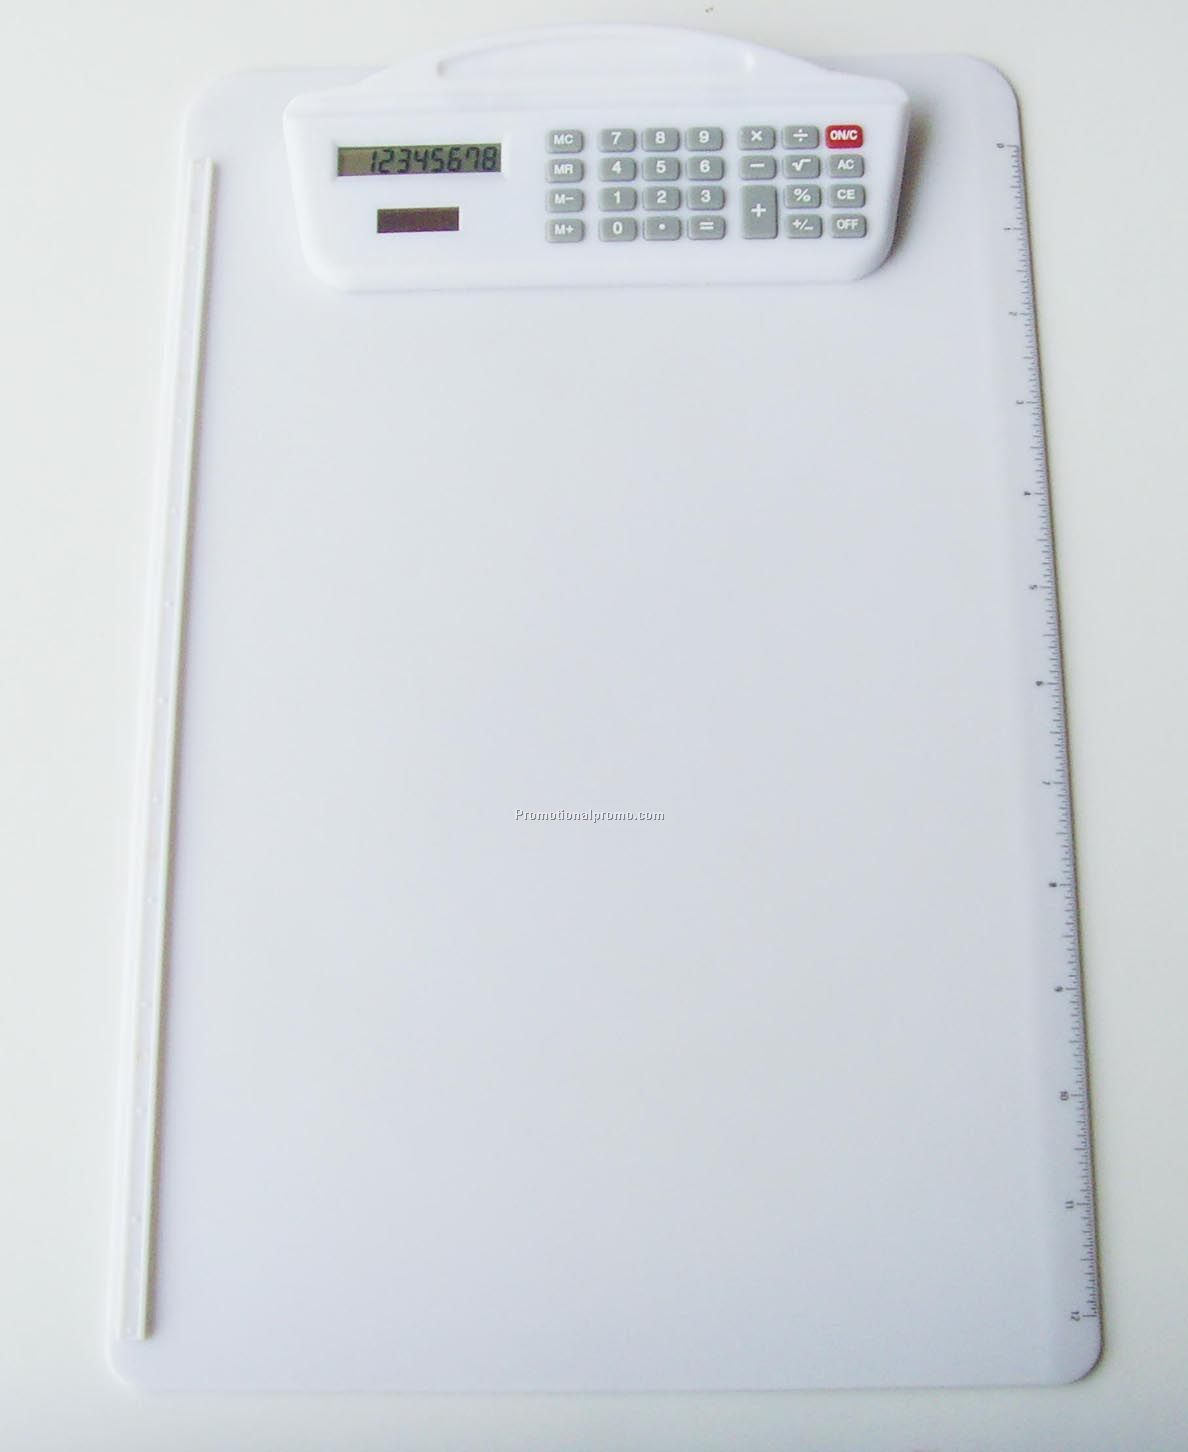 Plastic A4 size Clipboard Calculator 8 digits and Pad Calculator with ruler